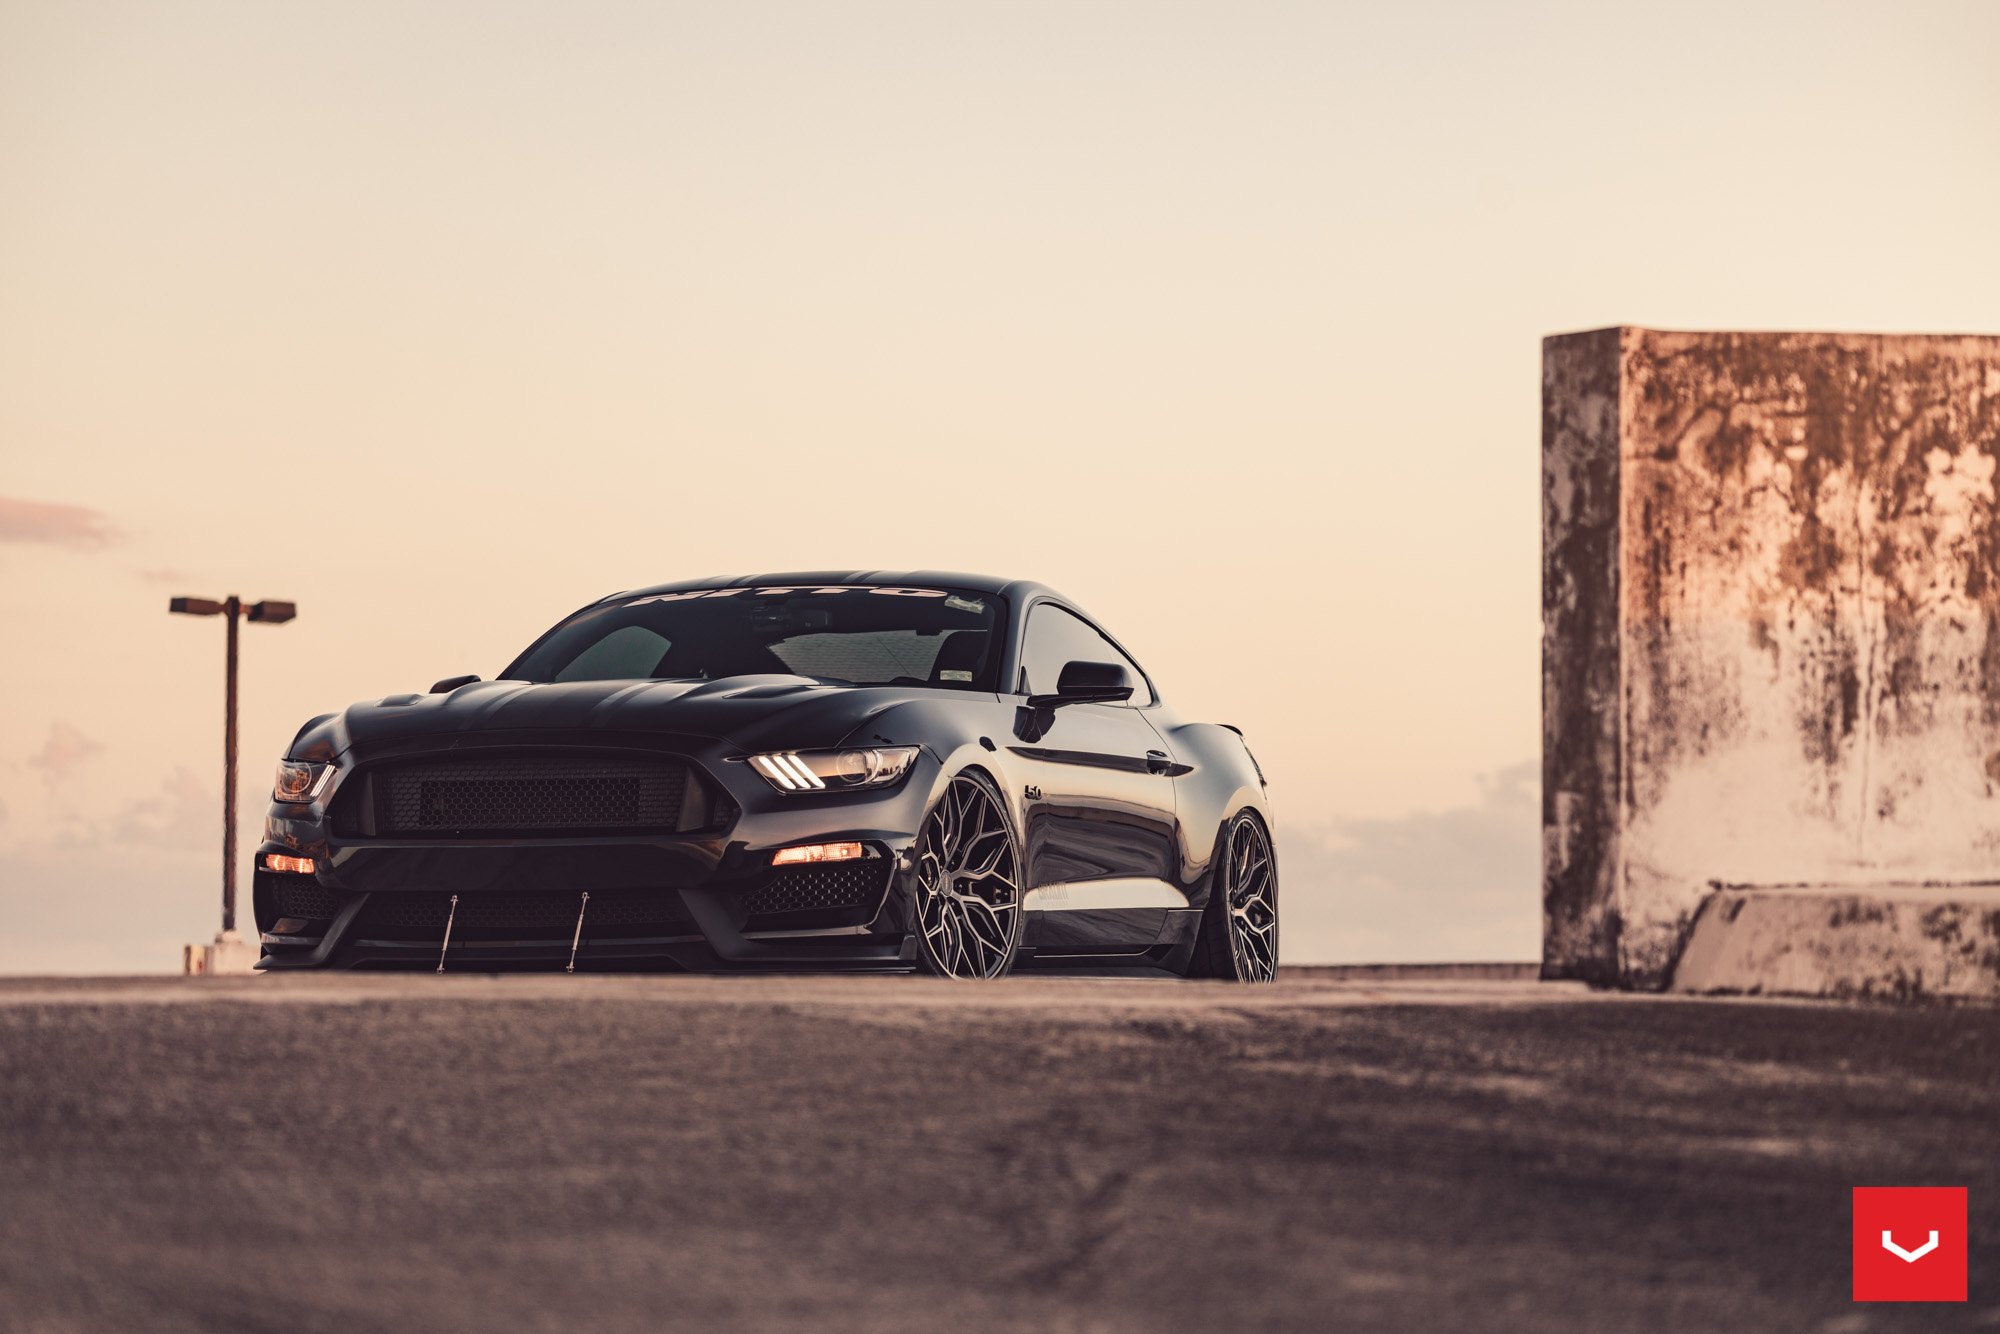 Aftermarket Projector Headlights on Black Ford Mustang - Photo by Vossen